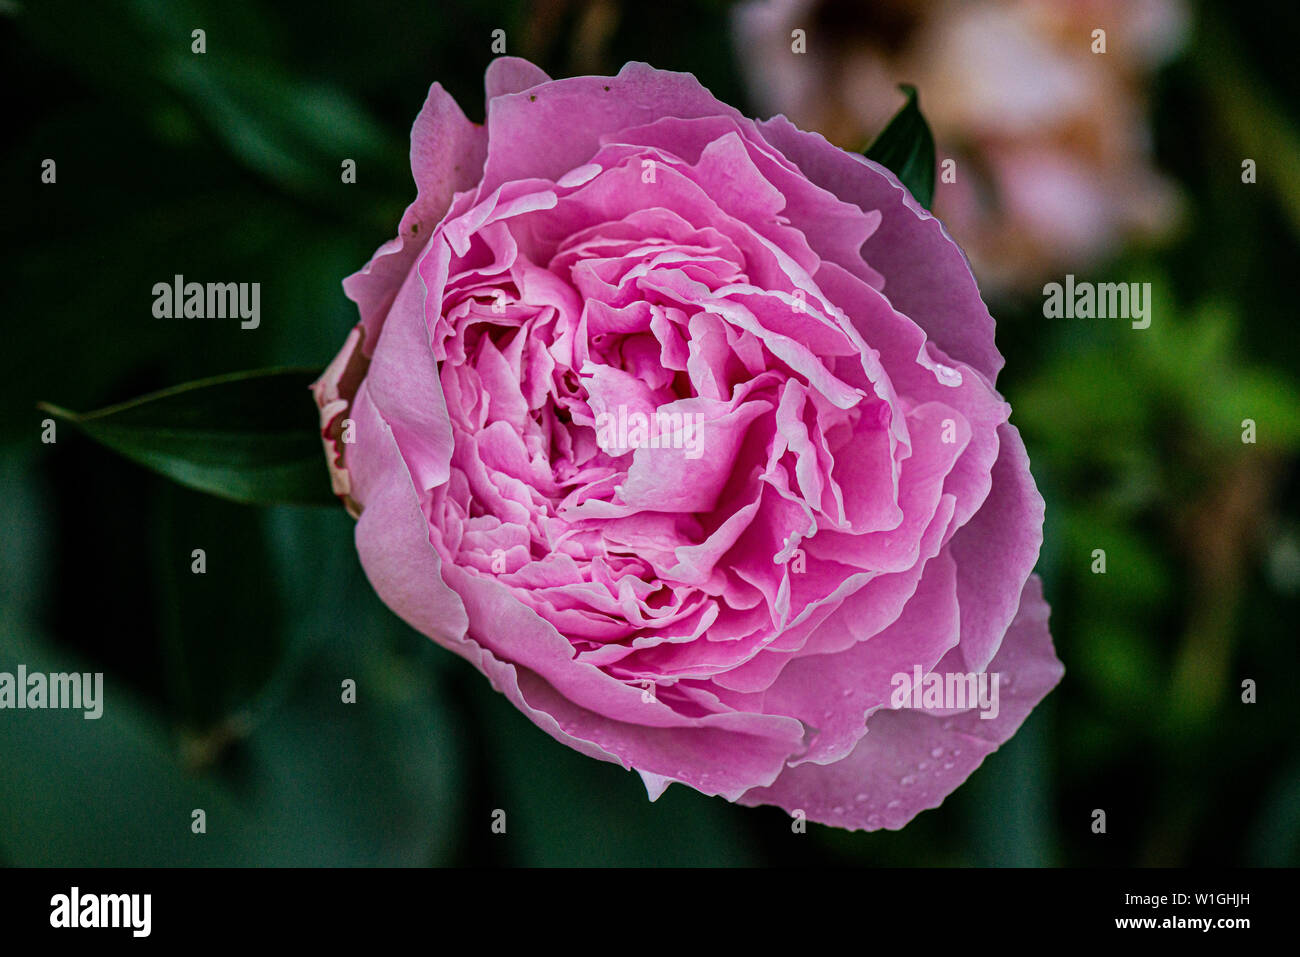 A pink rose Stock Photo